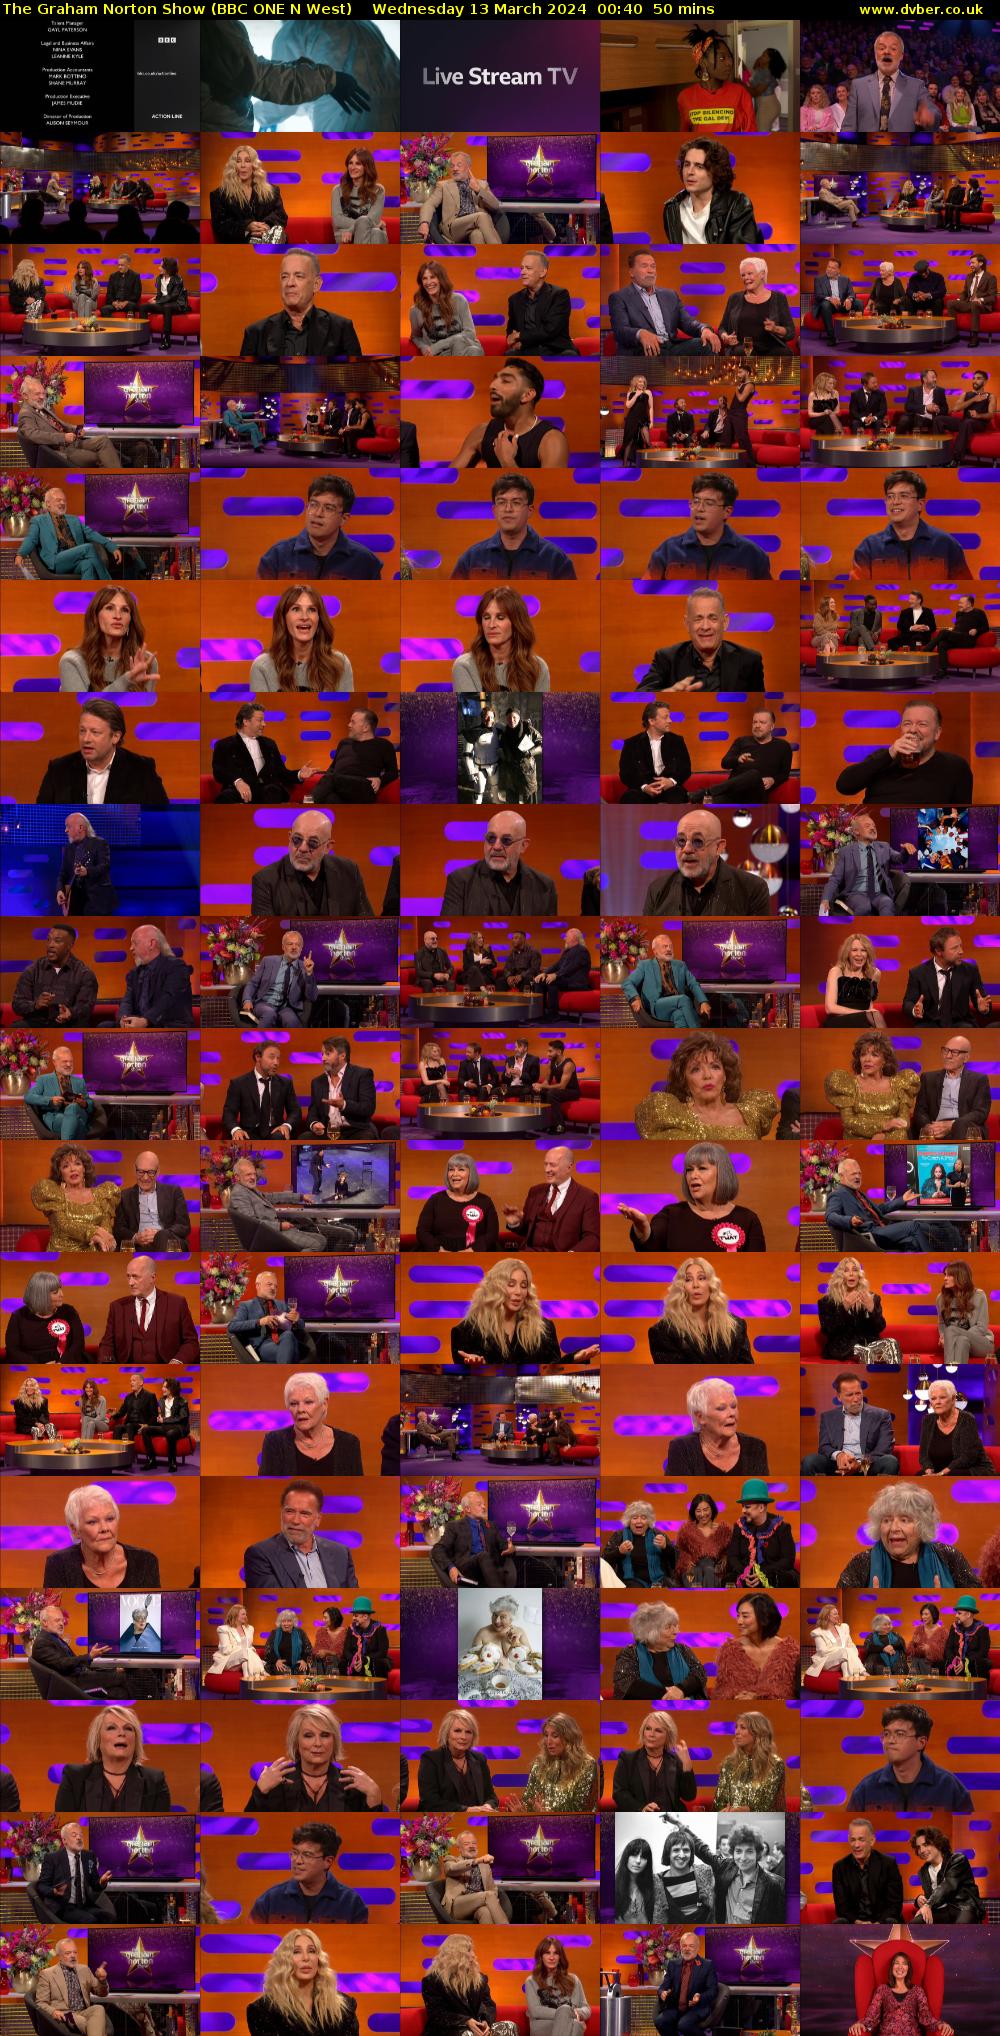 The Graham Norton Show (BBC ONE N West) Wednesday 13 March 2024 00:40 - 01:30